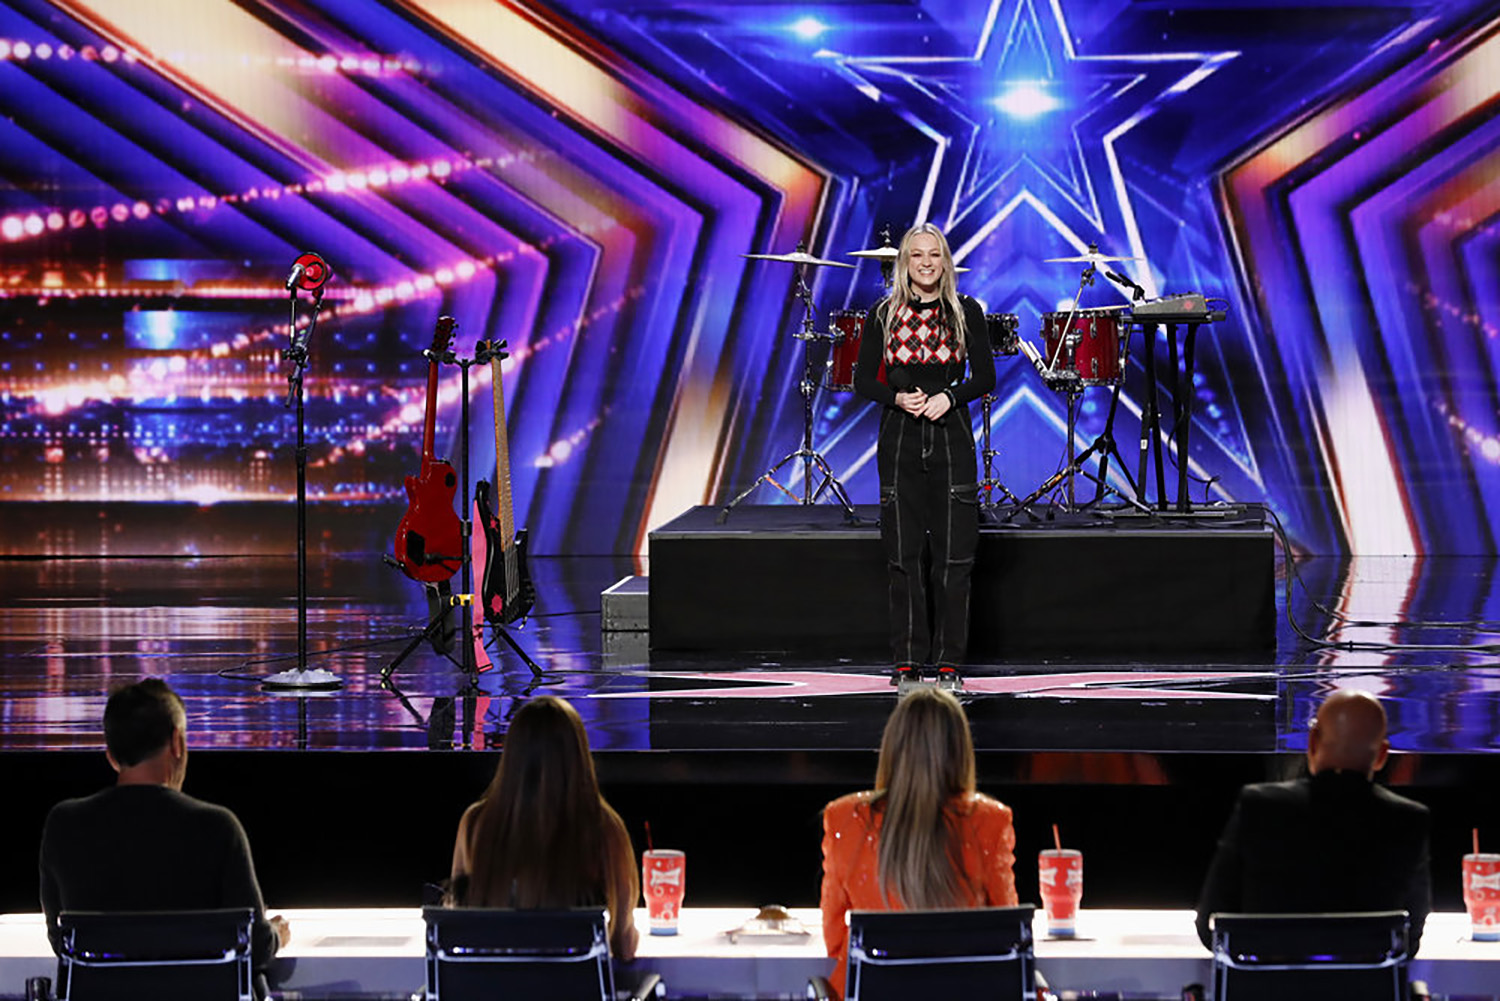 Americas Got Talent performer Mia Morris stands on stage in front of the judges.